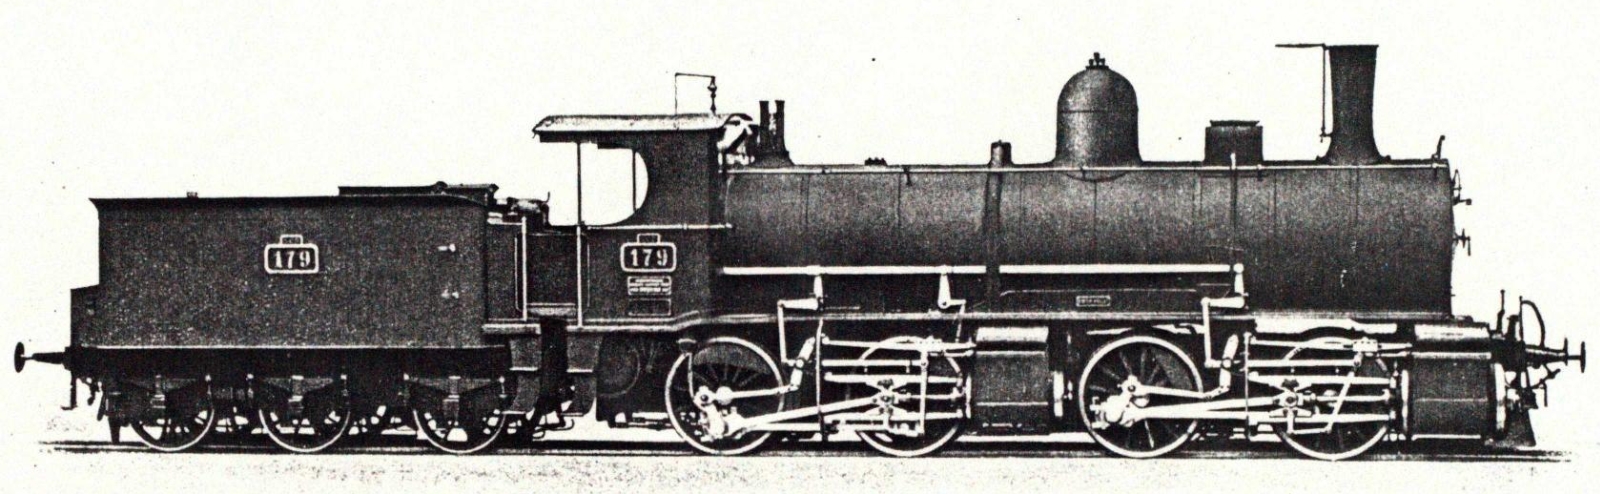 No. 179 in the SLM type sheet